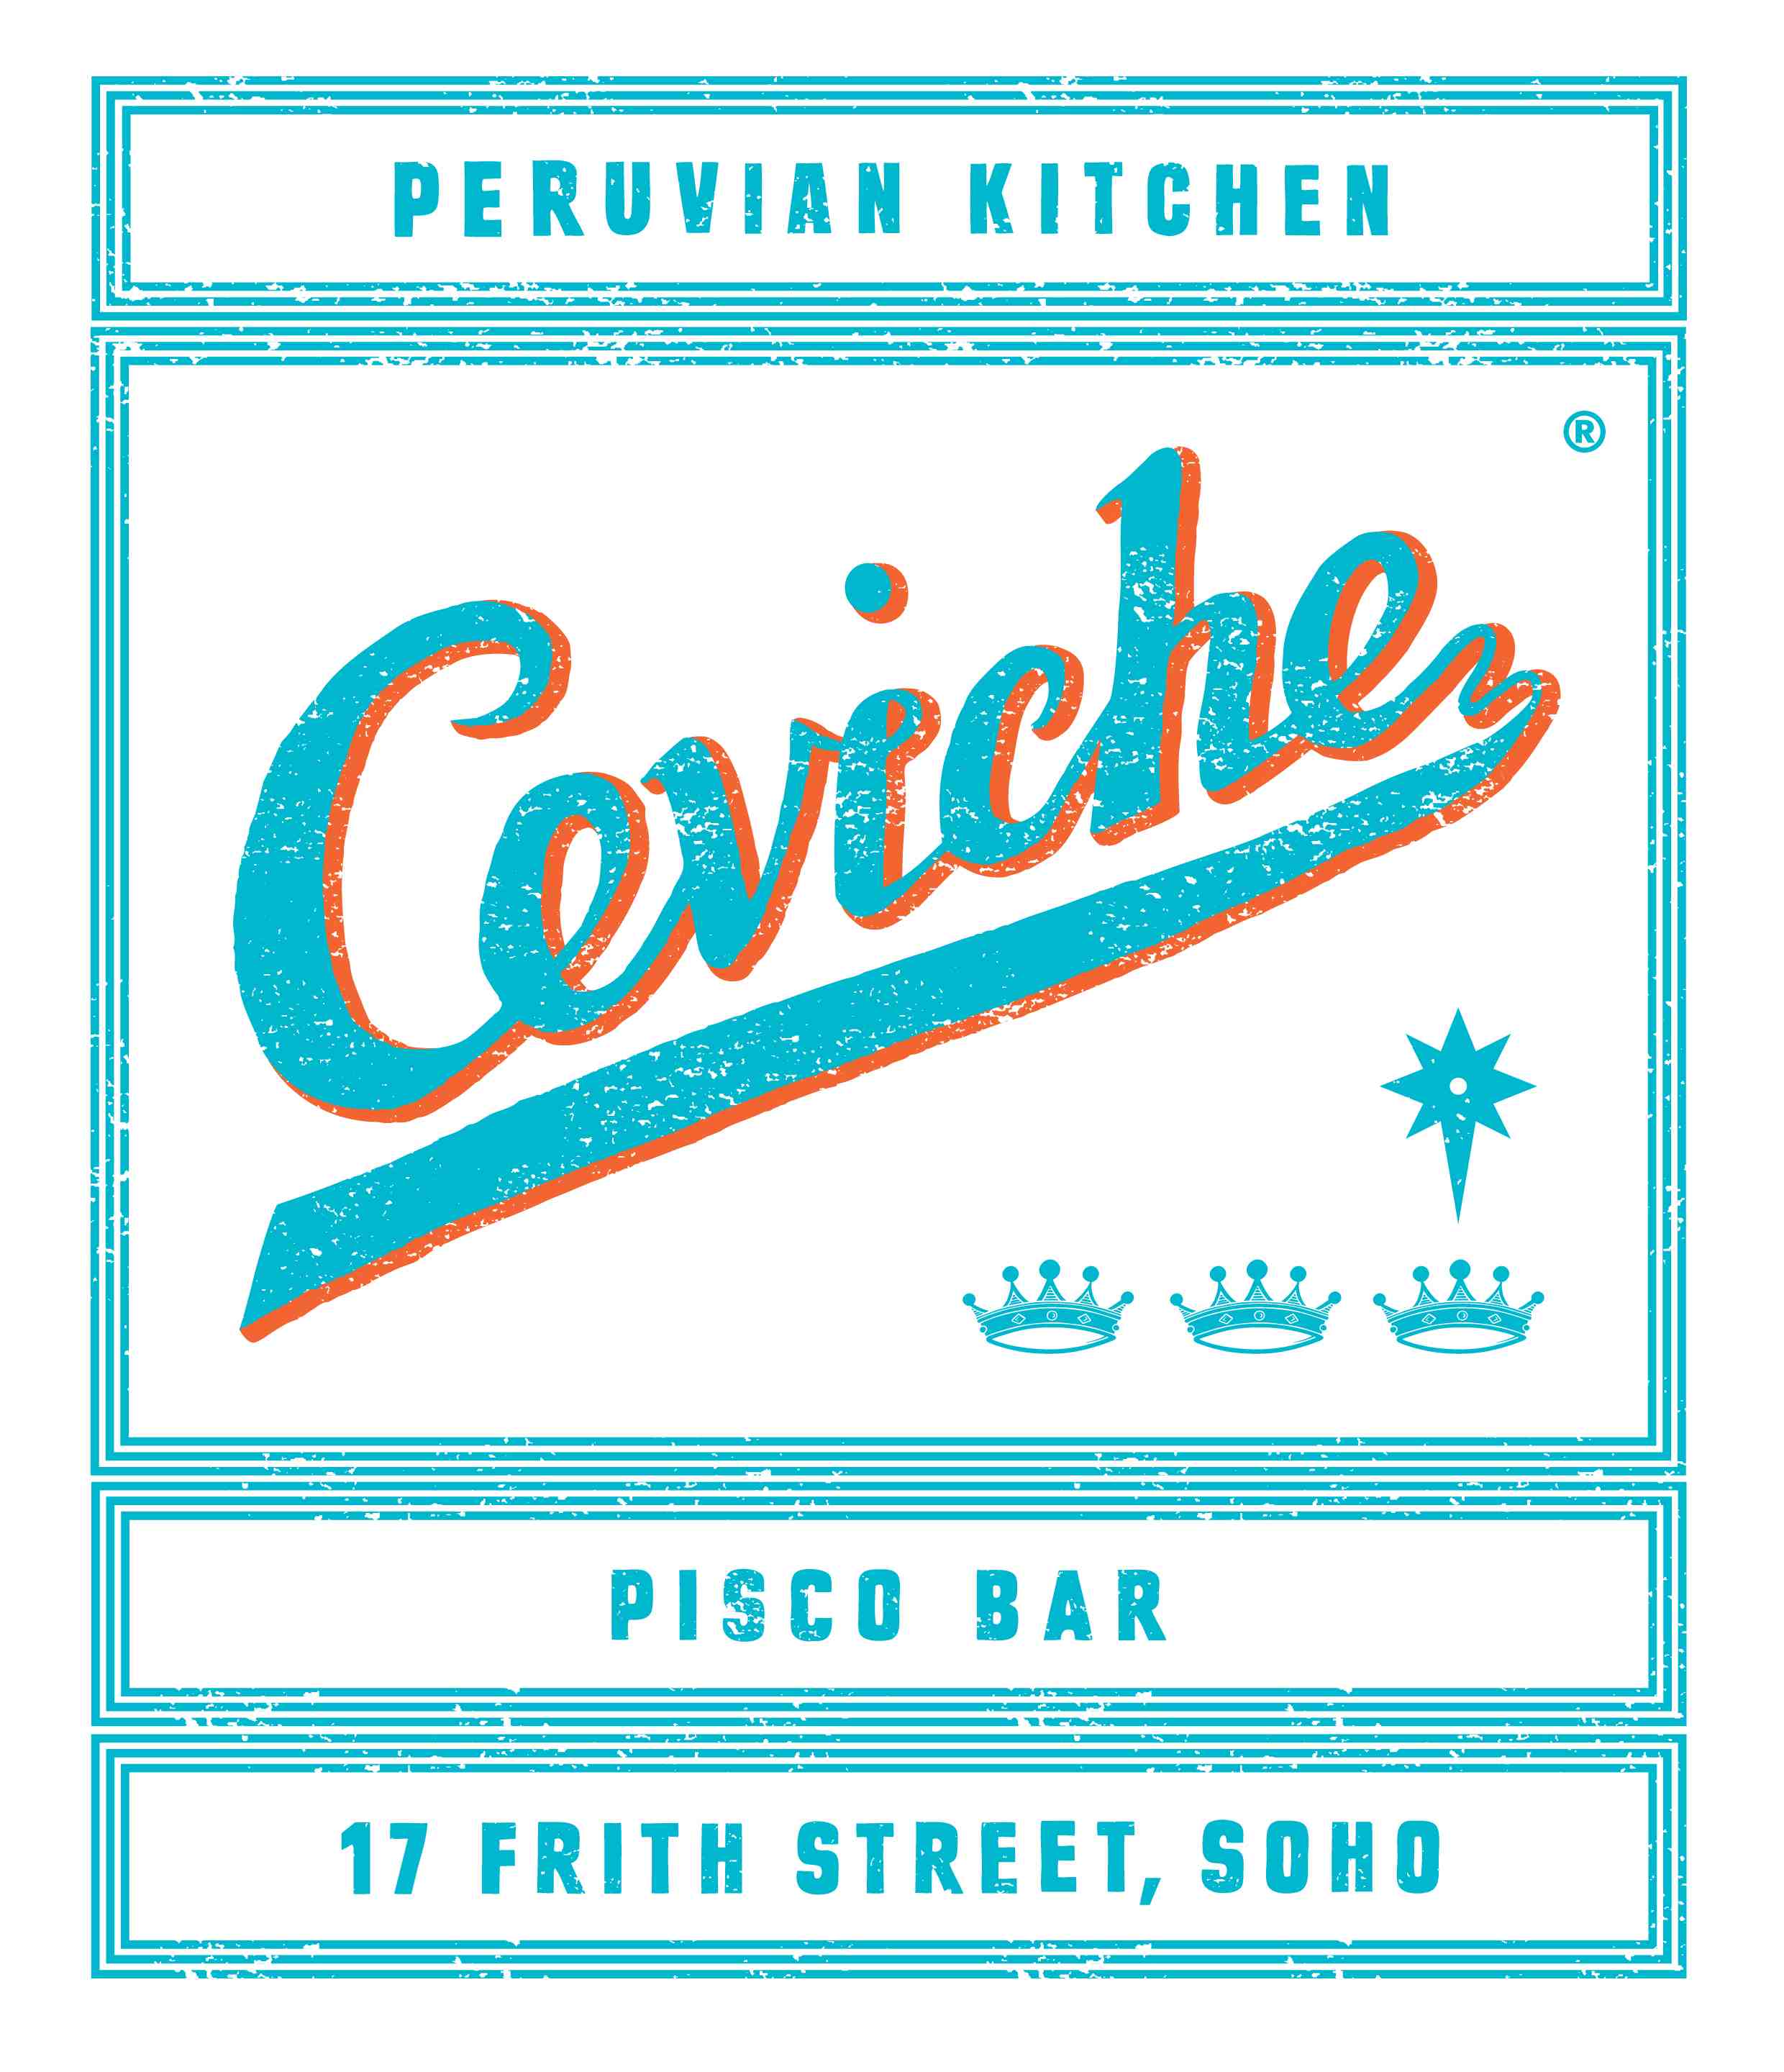 Ceviche Logo - Ceviche Logo With Registered 1